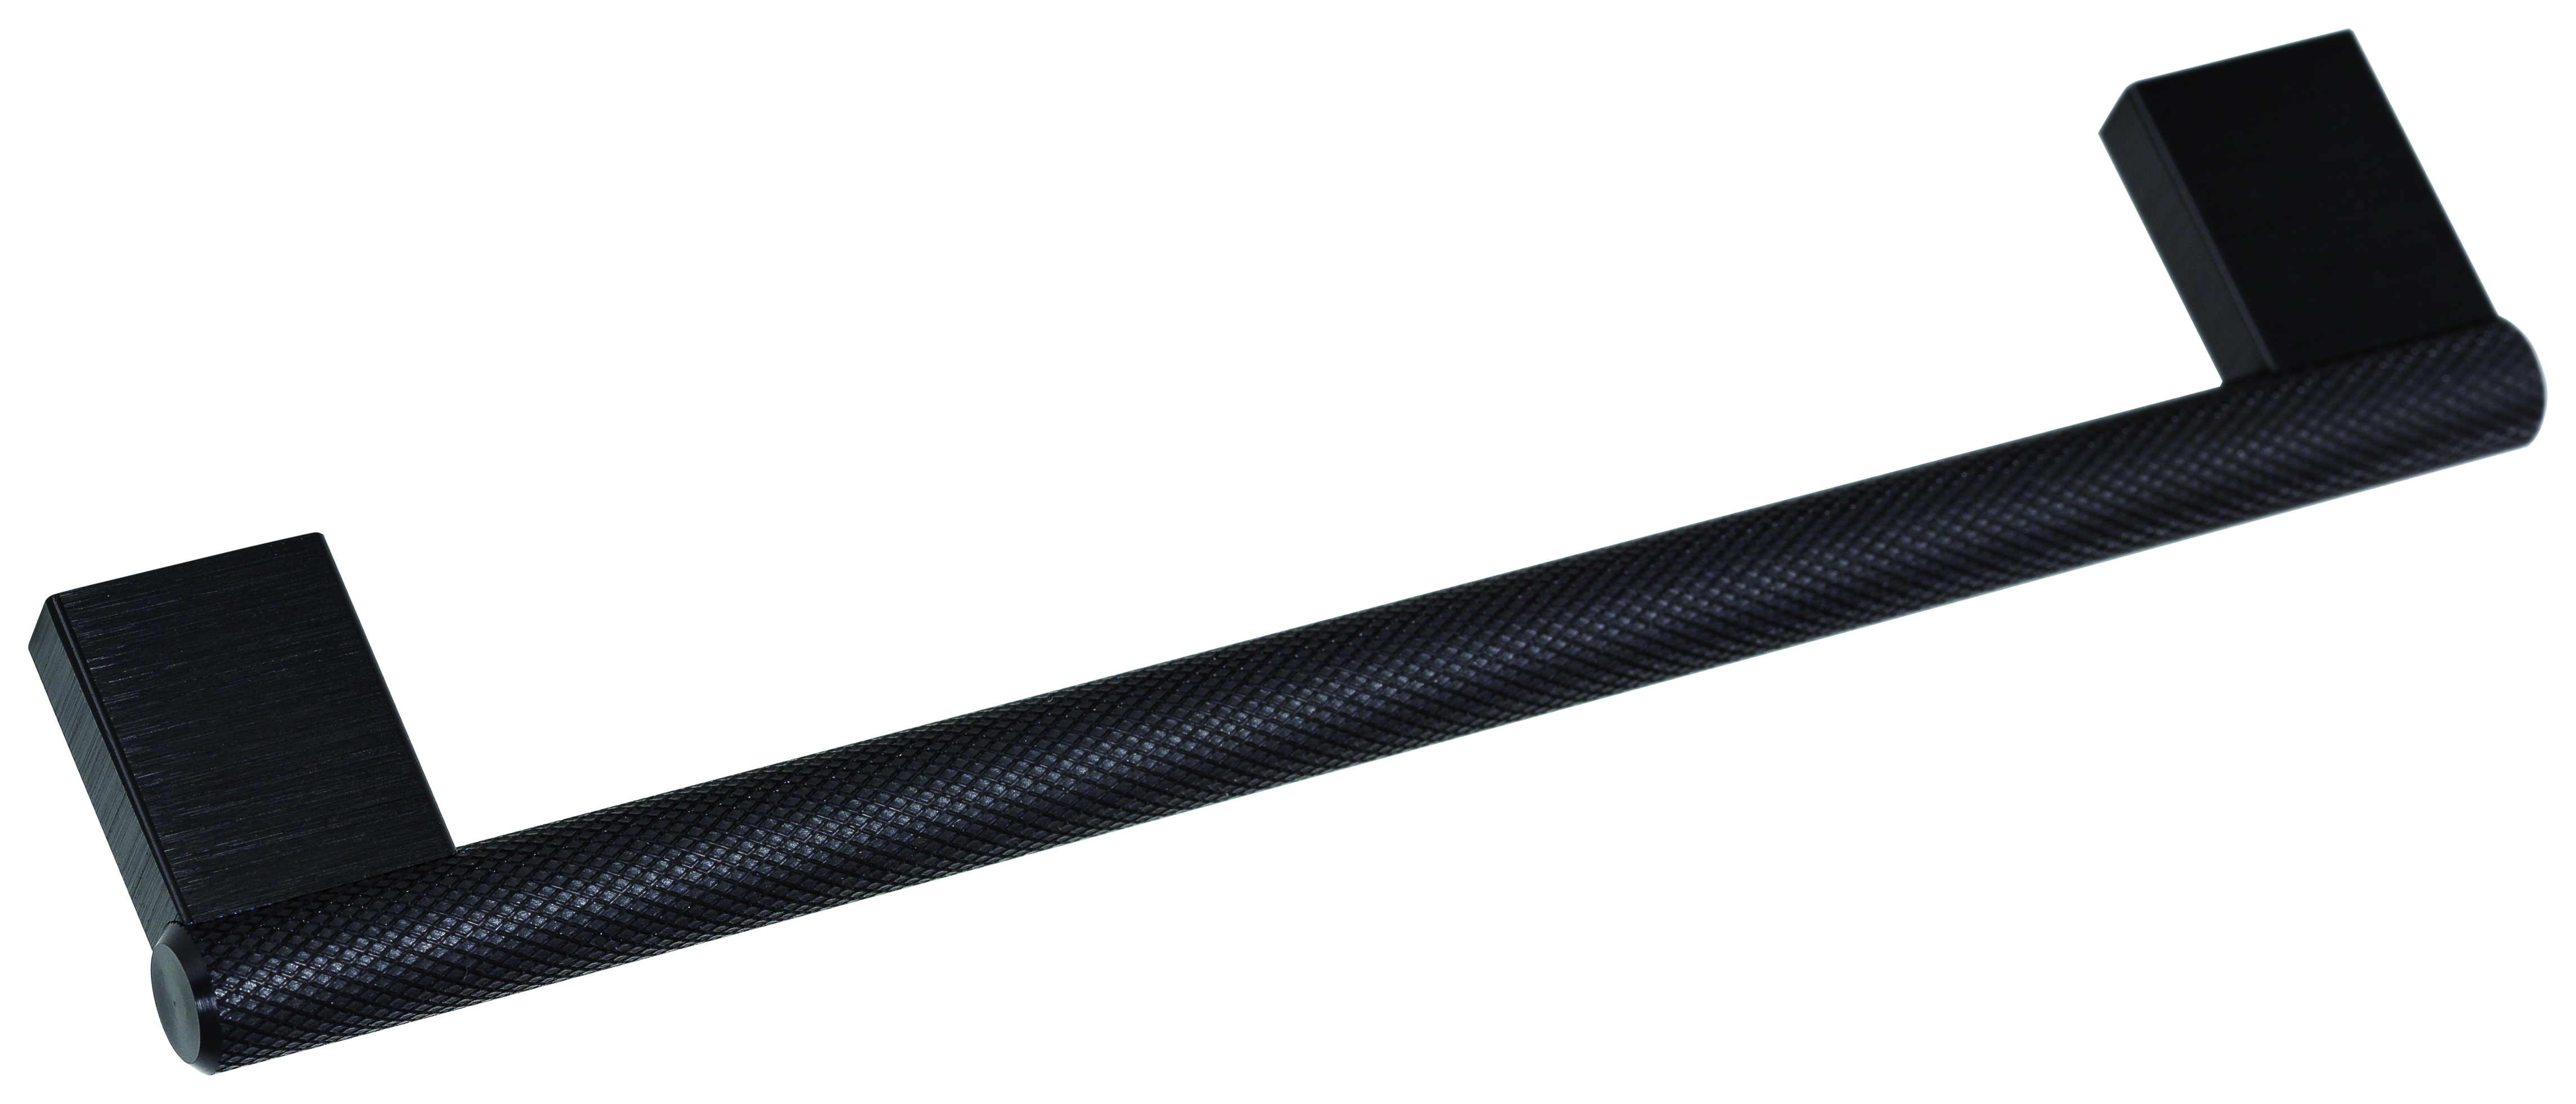 Image of Wickes Dalston Handle - Black 160mm